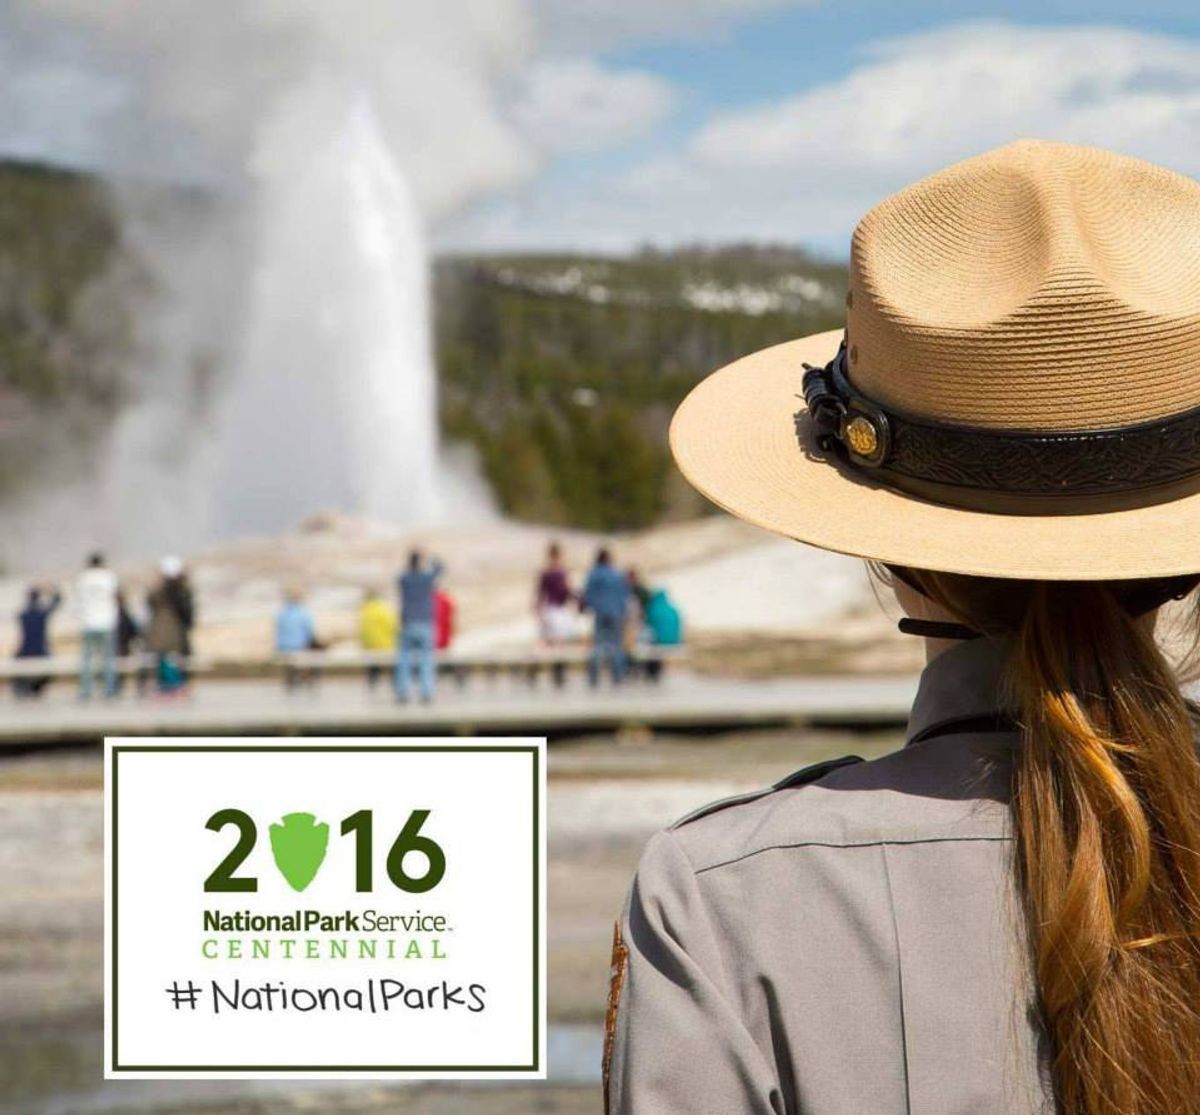 Celebrate 100 Years of National Parks